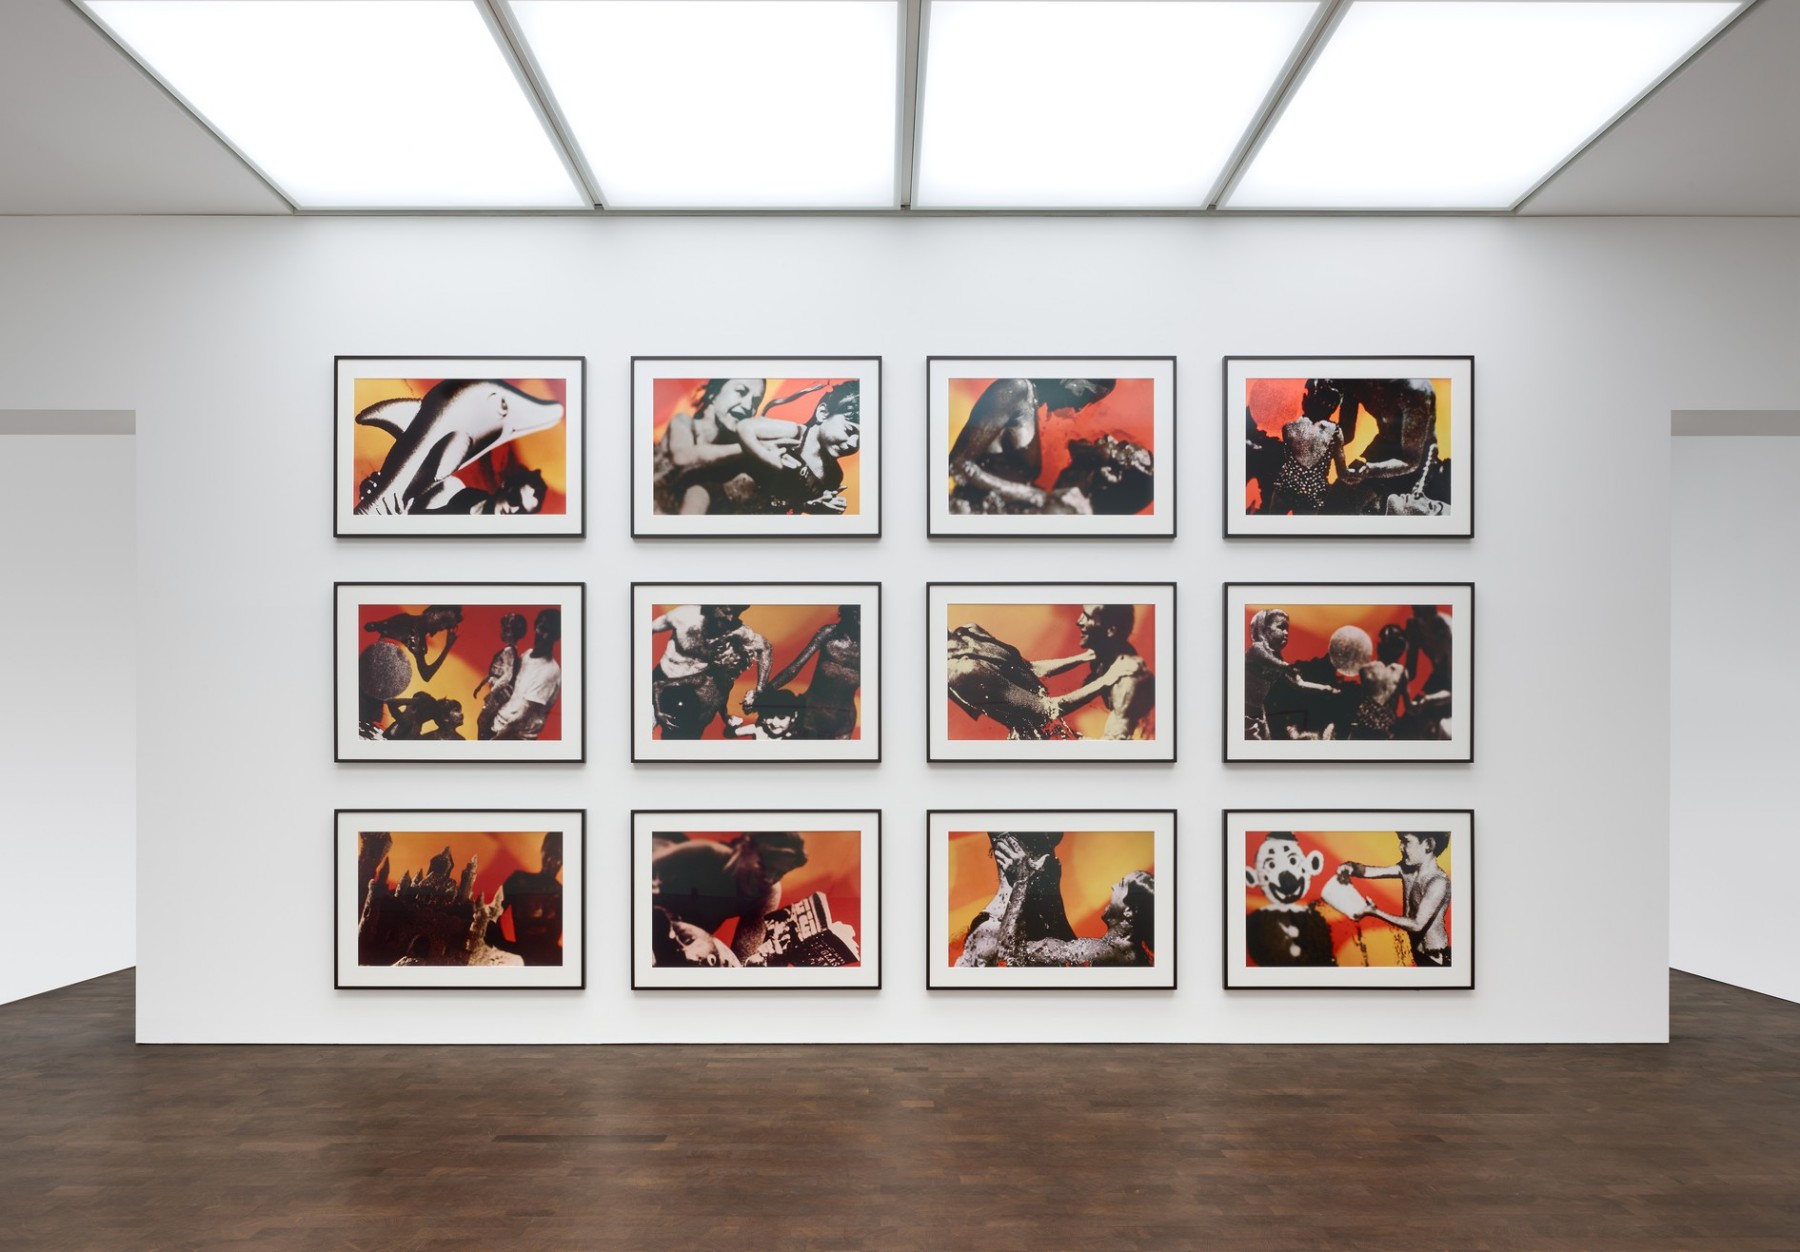 Installation image for Richard Prince: Early Photography, 1977–87, at Gagosian